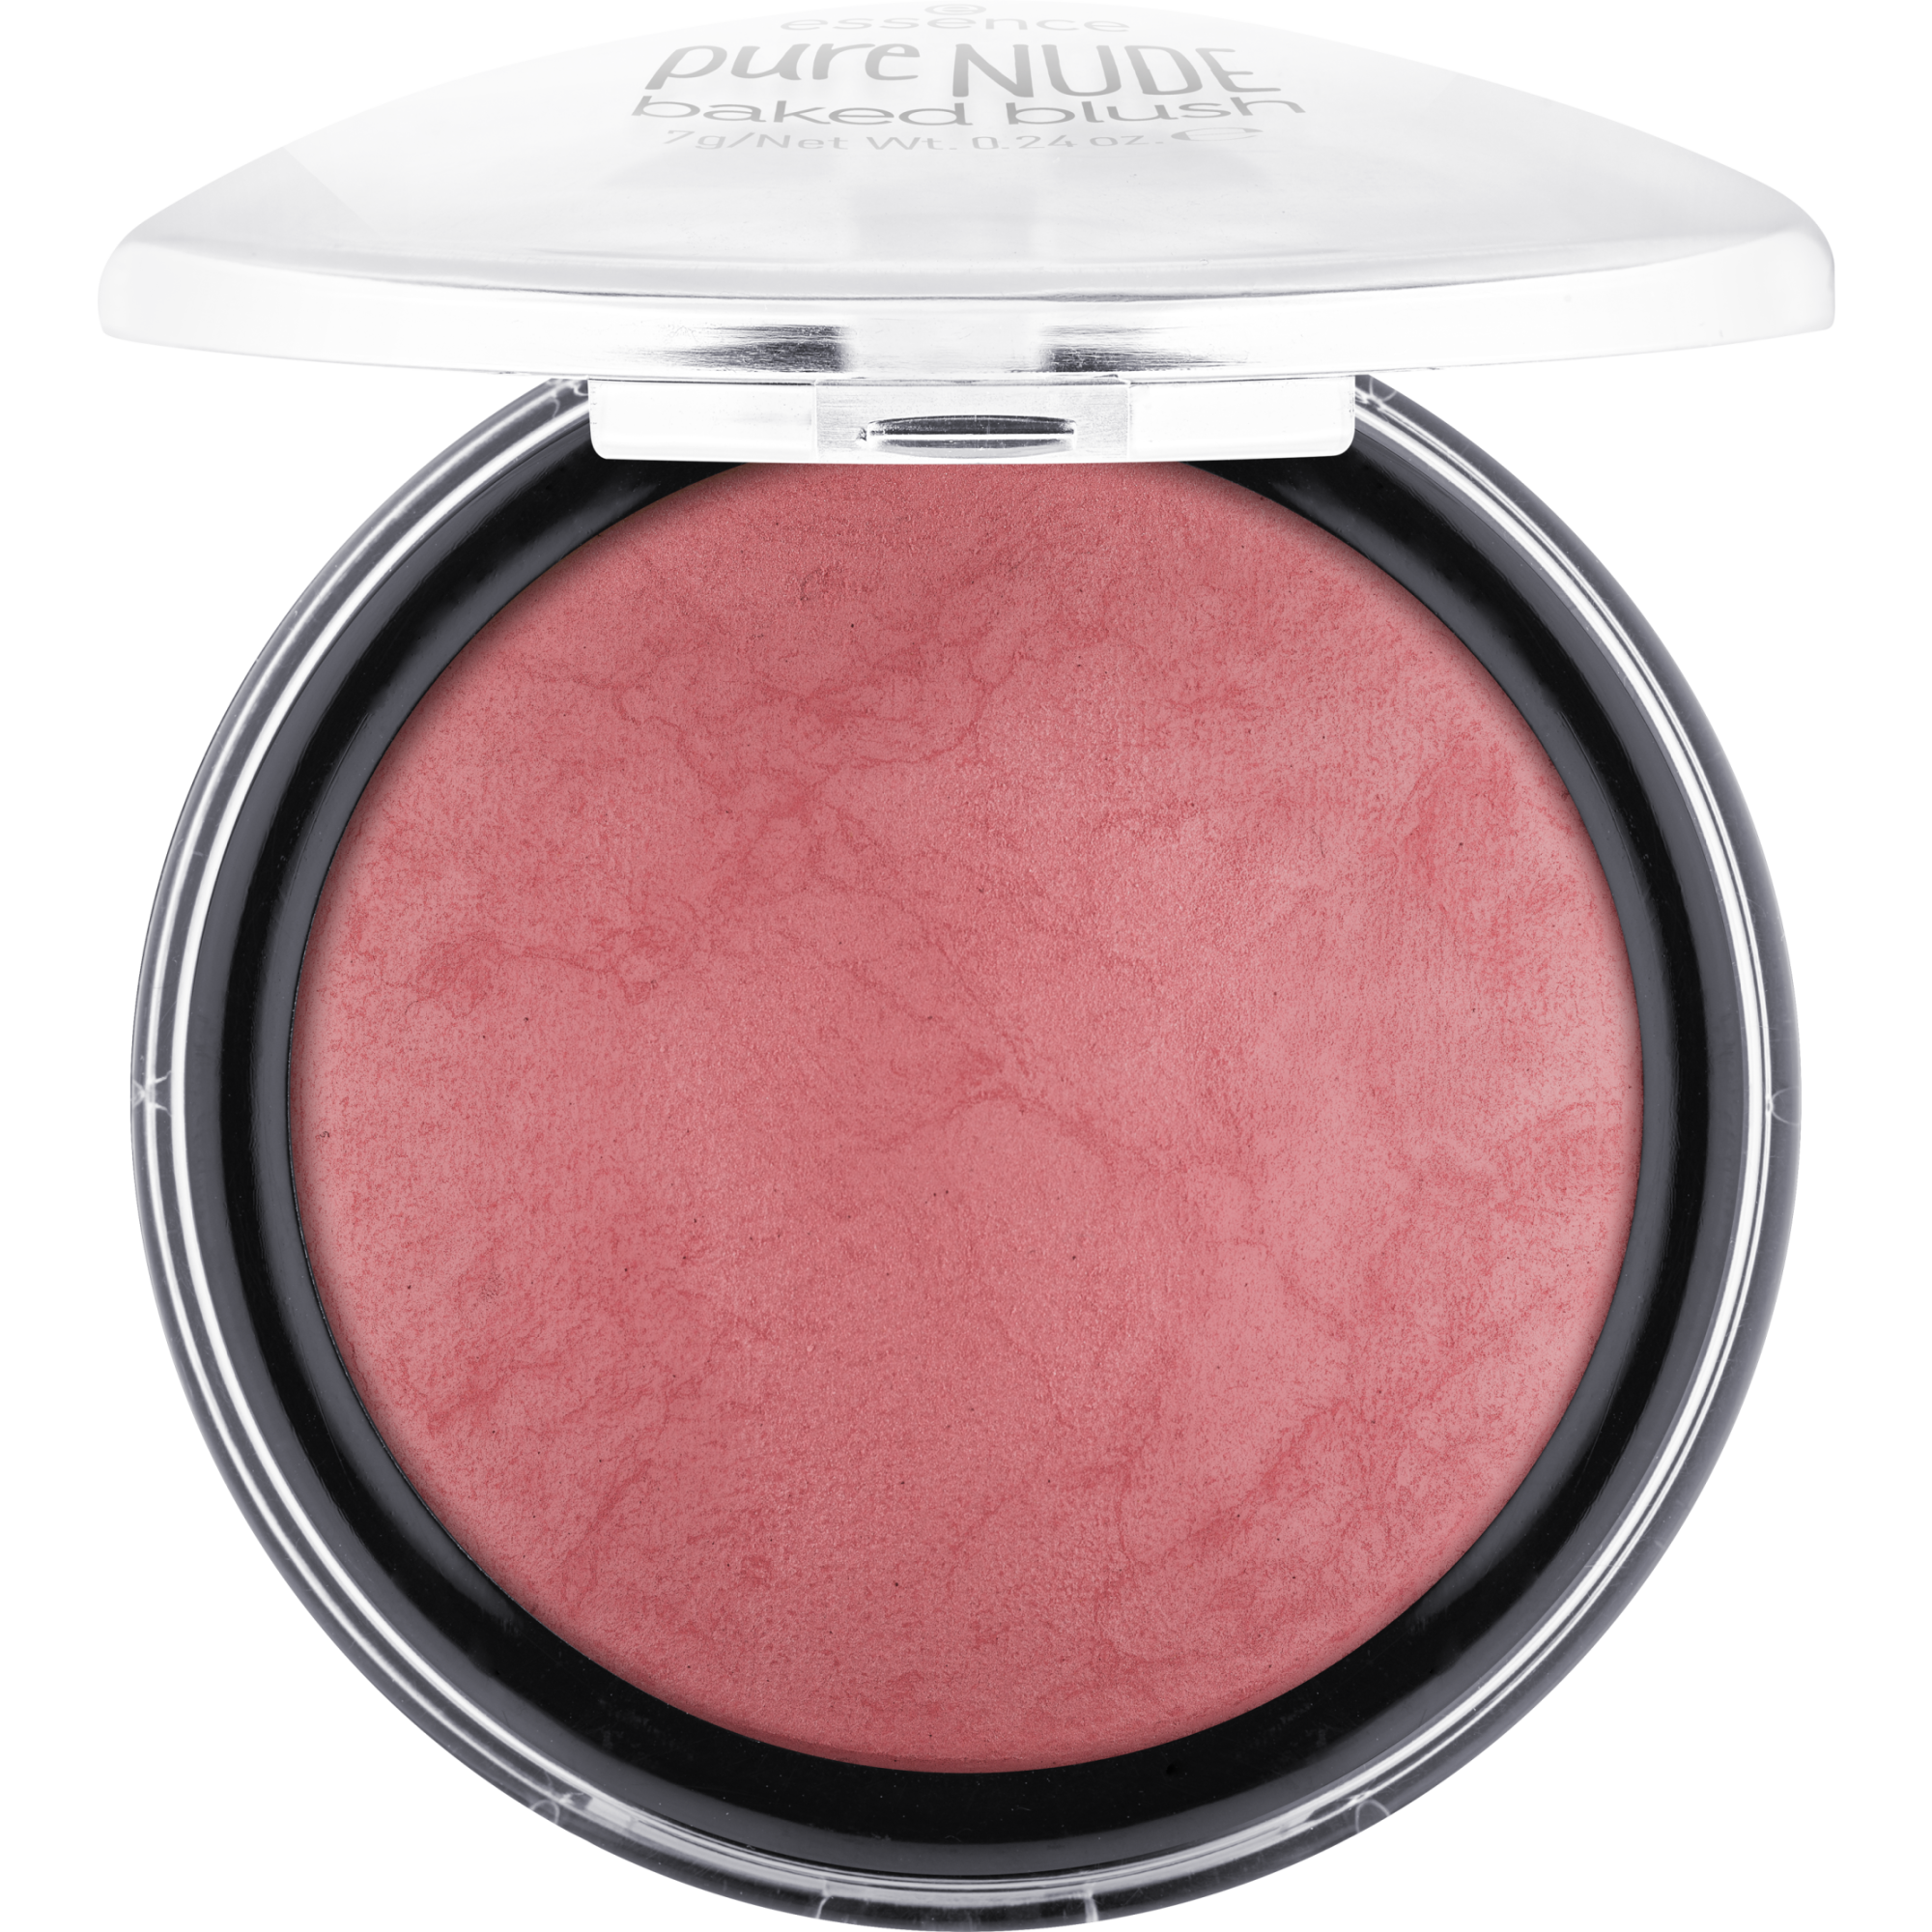 pure NUDE baked blush